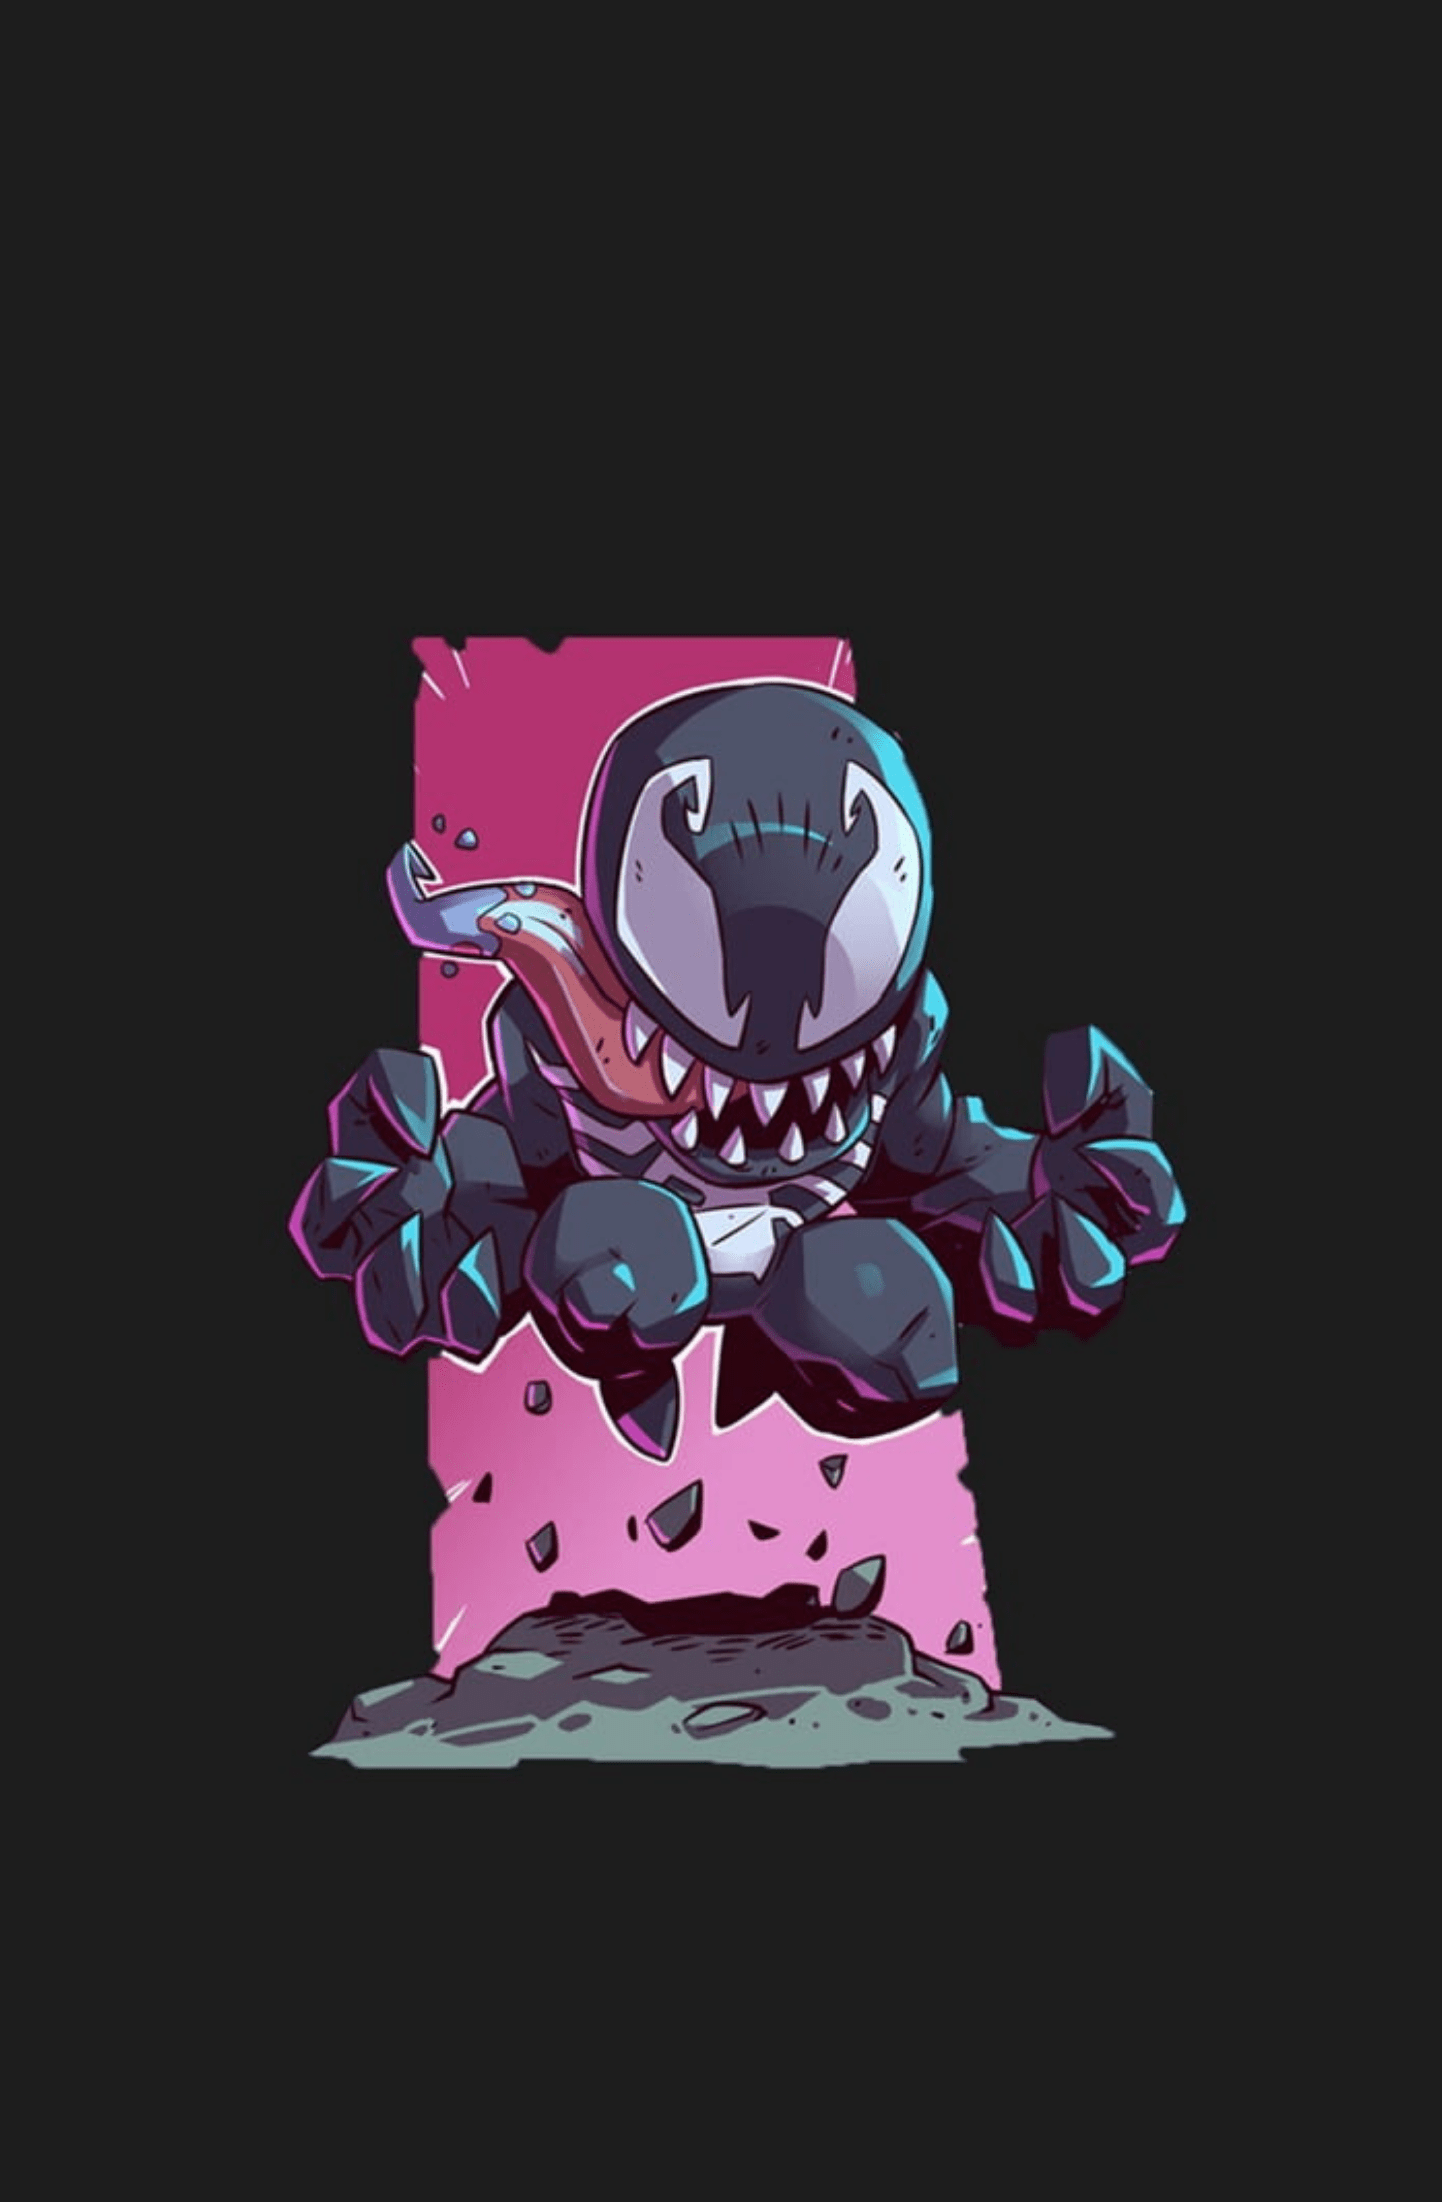 Cartoon character sticker Venom wallpaper for phone, Best iPhone Wallpaper and iPhone background, WallpaperUpdate, Best iPhone Wallpaper and iPhone background